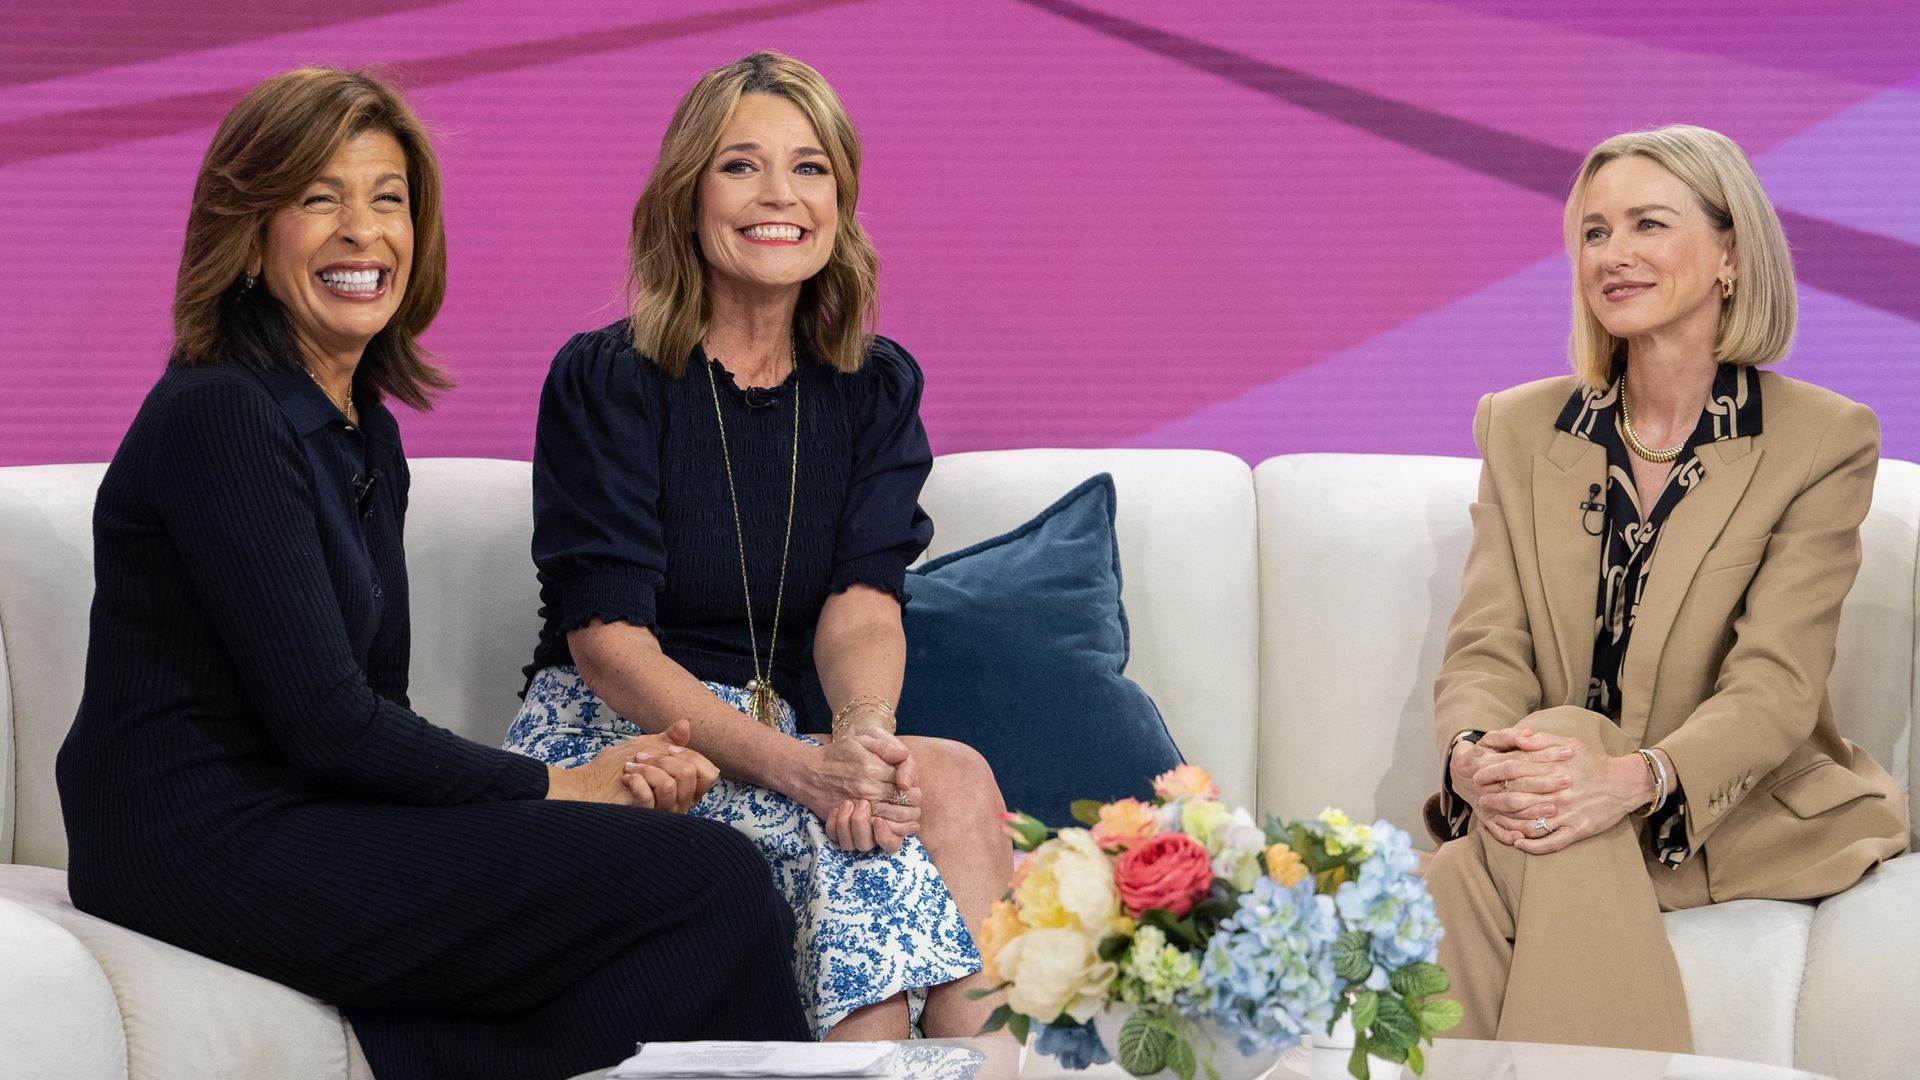 Hoda Kotb's awkward on-air moment with Naomi Watts - did she reveal she's married to Billy Crudup